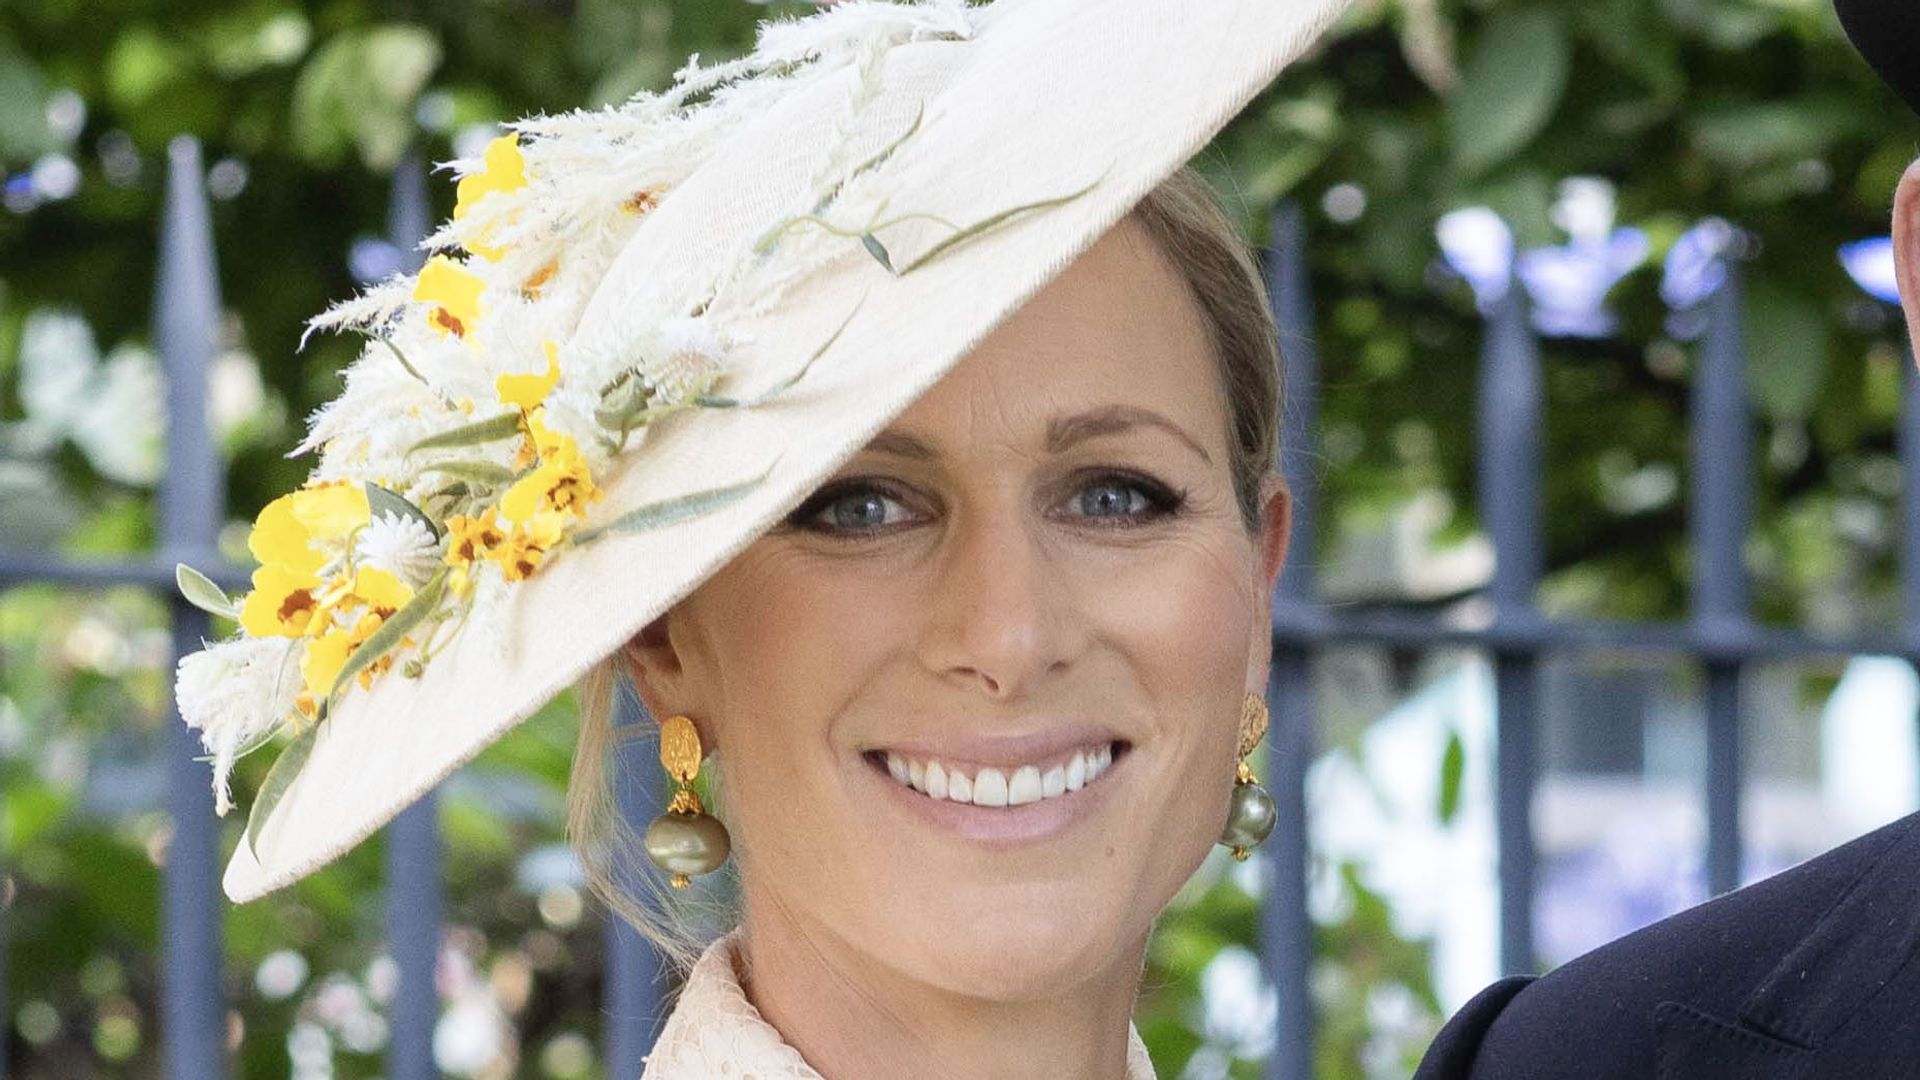 Zara Tindall smiling in a floral hat